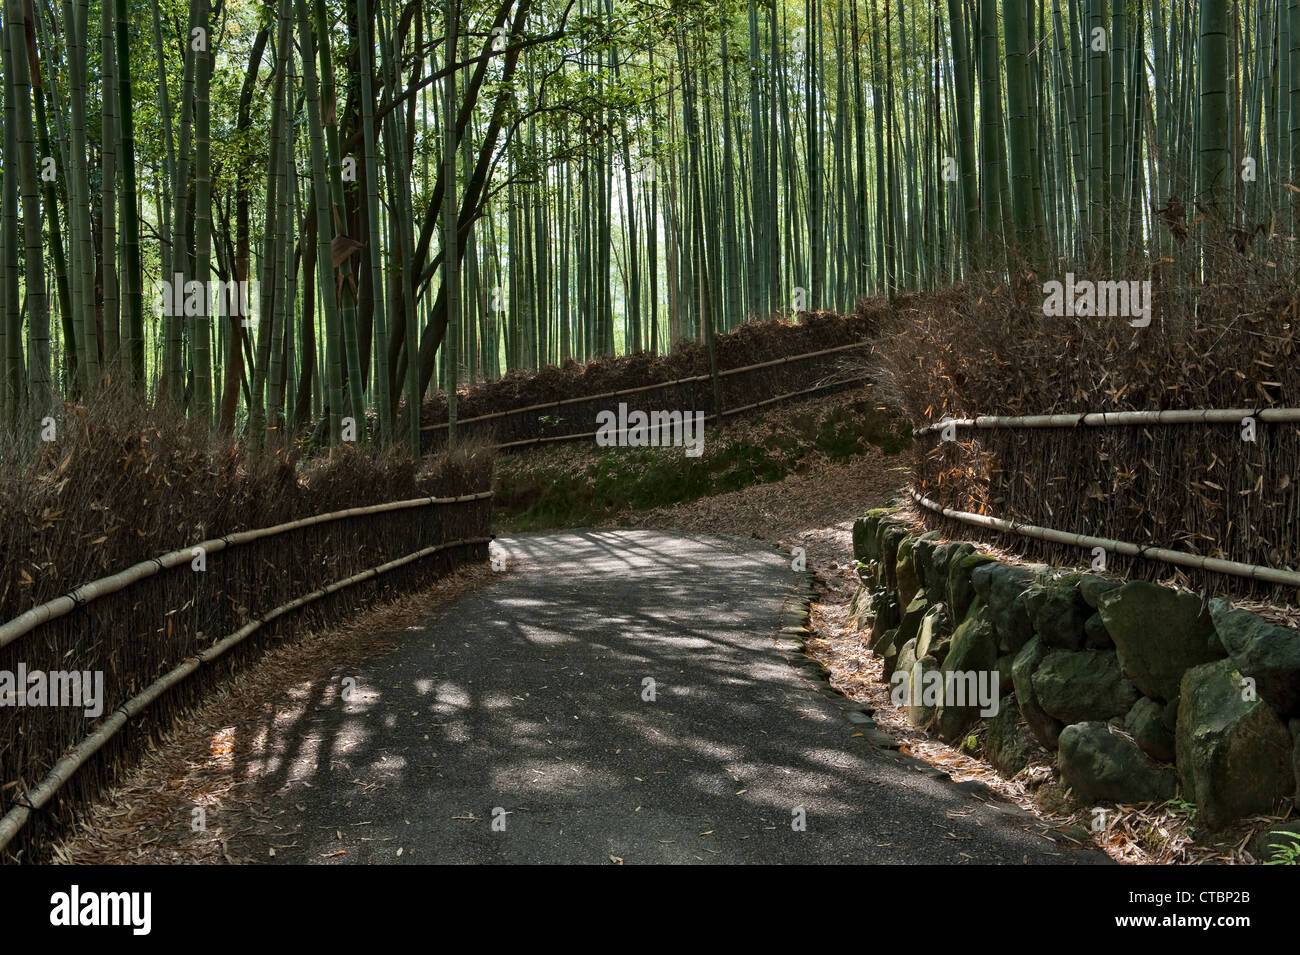 Bamboo Forest (Kyoto, Japan) - Wikipedia